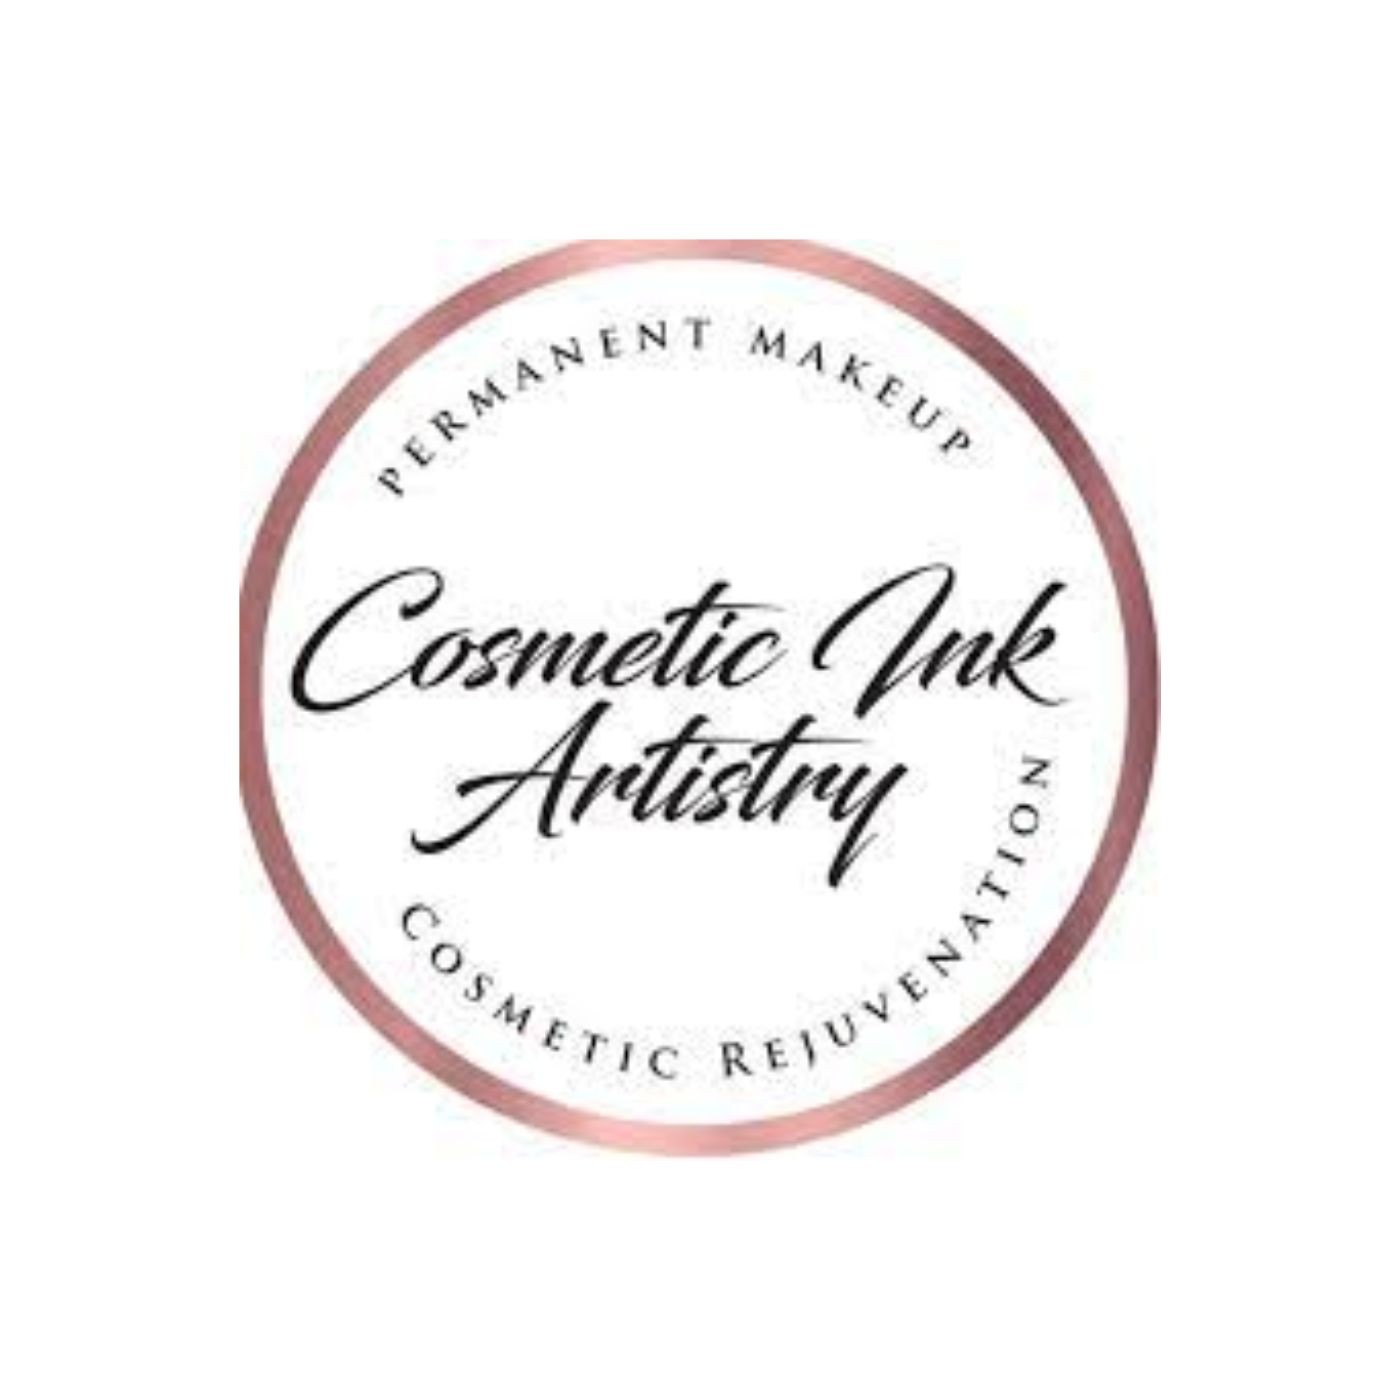 Cosmetic Ink Artistry